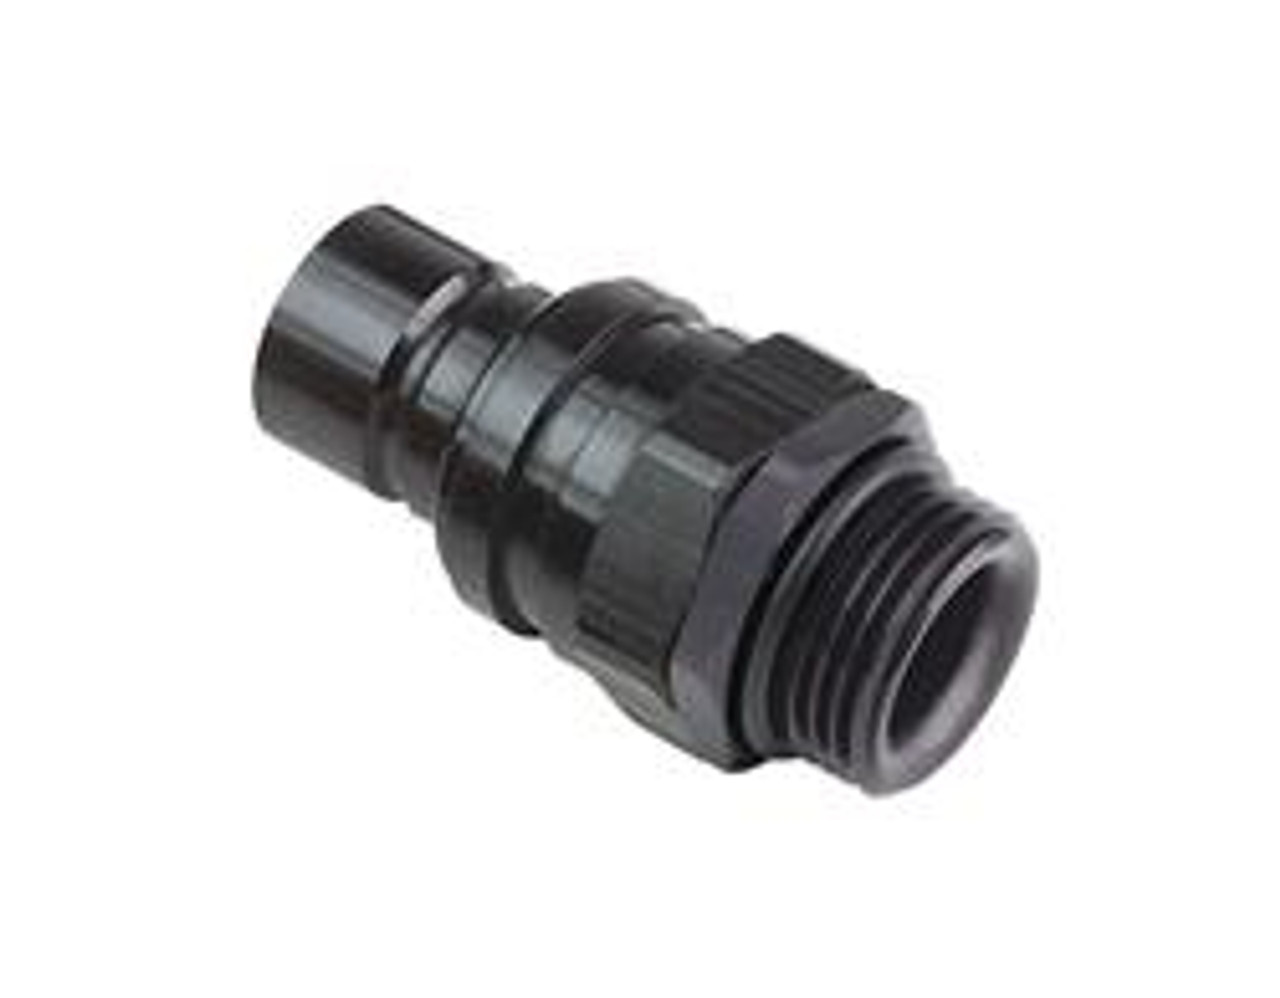 Jiffy-Tite 3000 Quick Release Straight Dry Break Plug - AN ORB Threaded